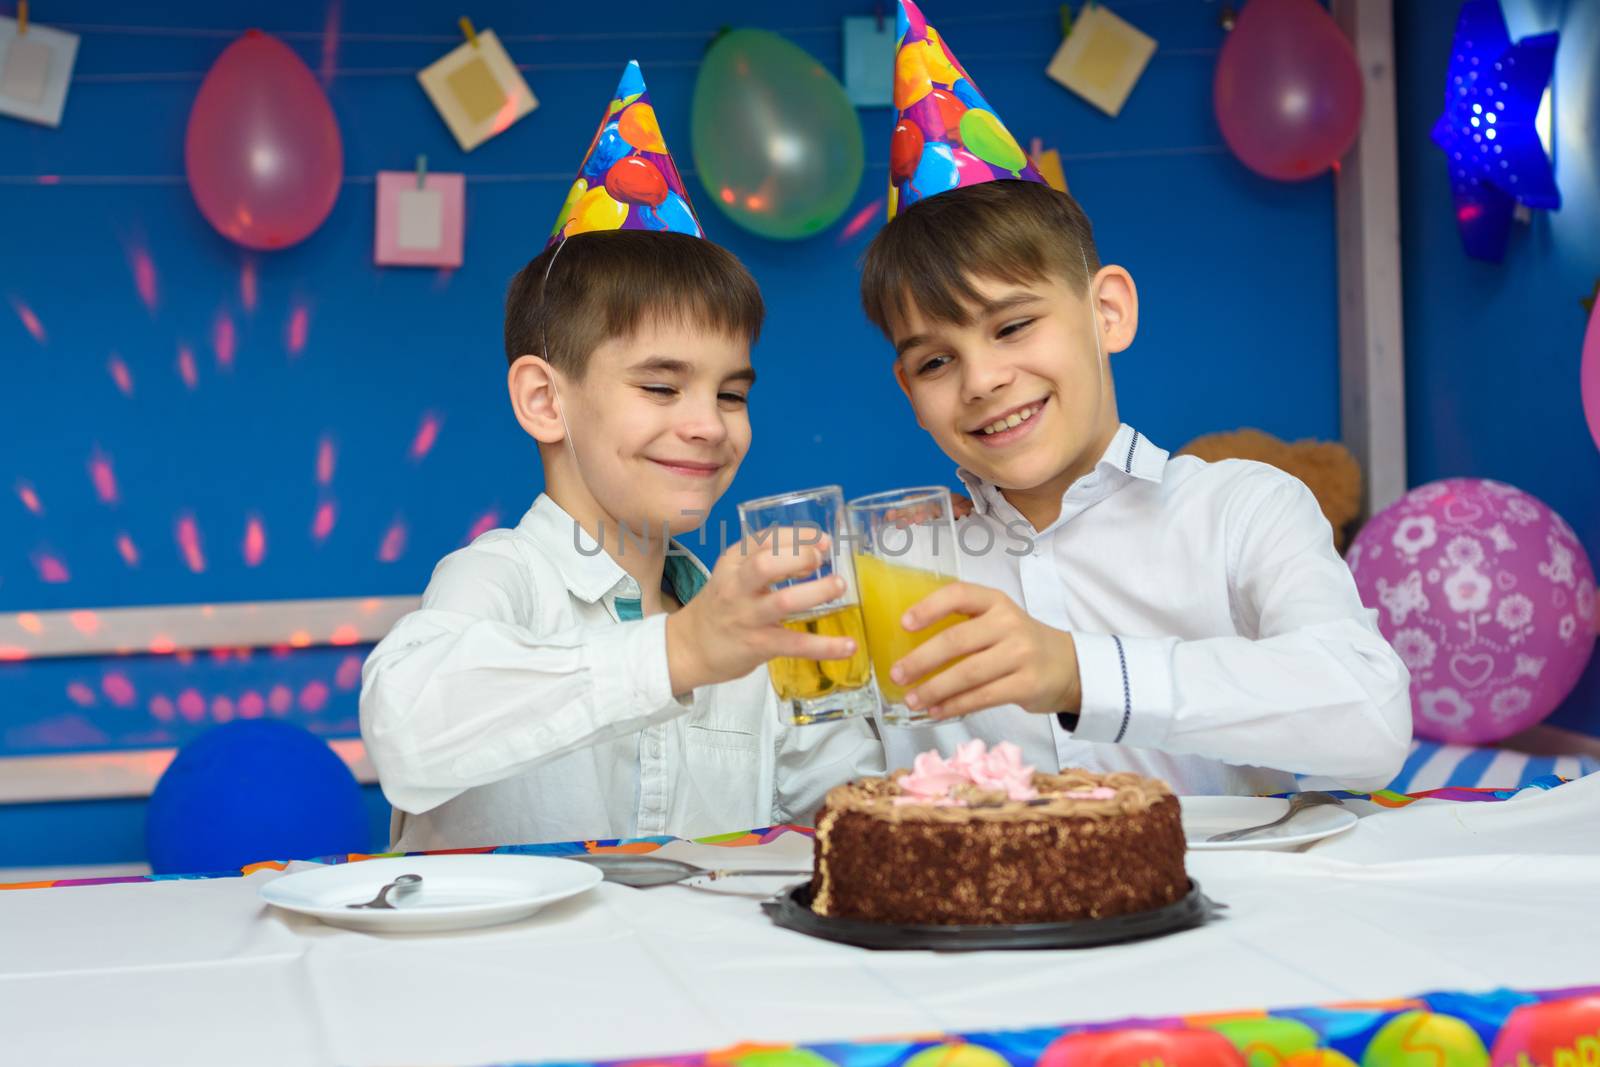 Two brothers banging glasses of juice at a birthday party by Madhourse